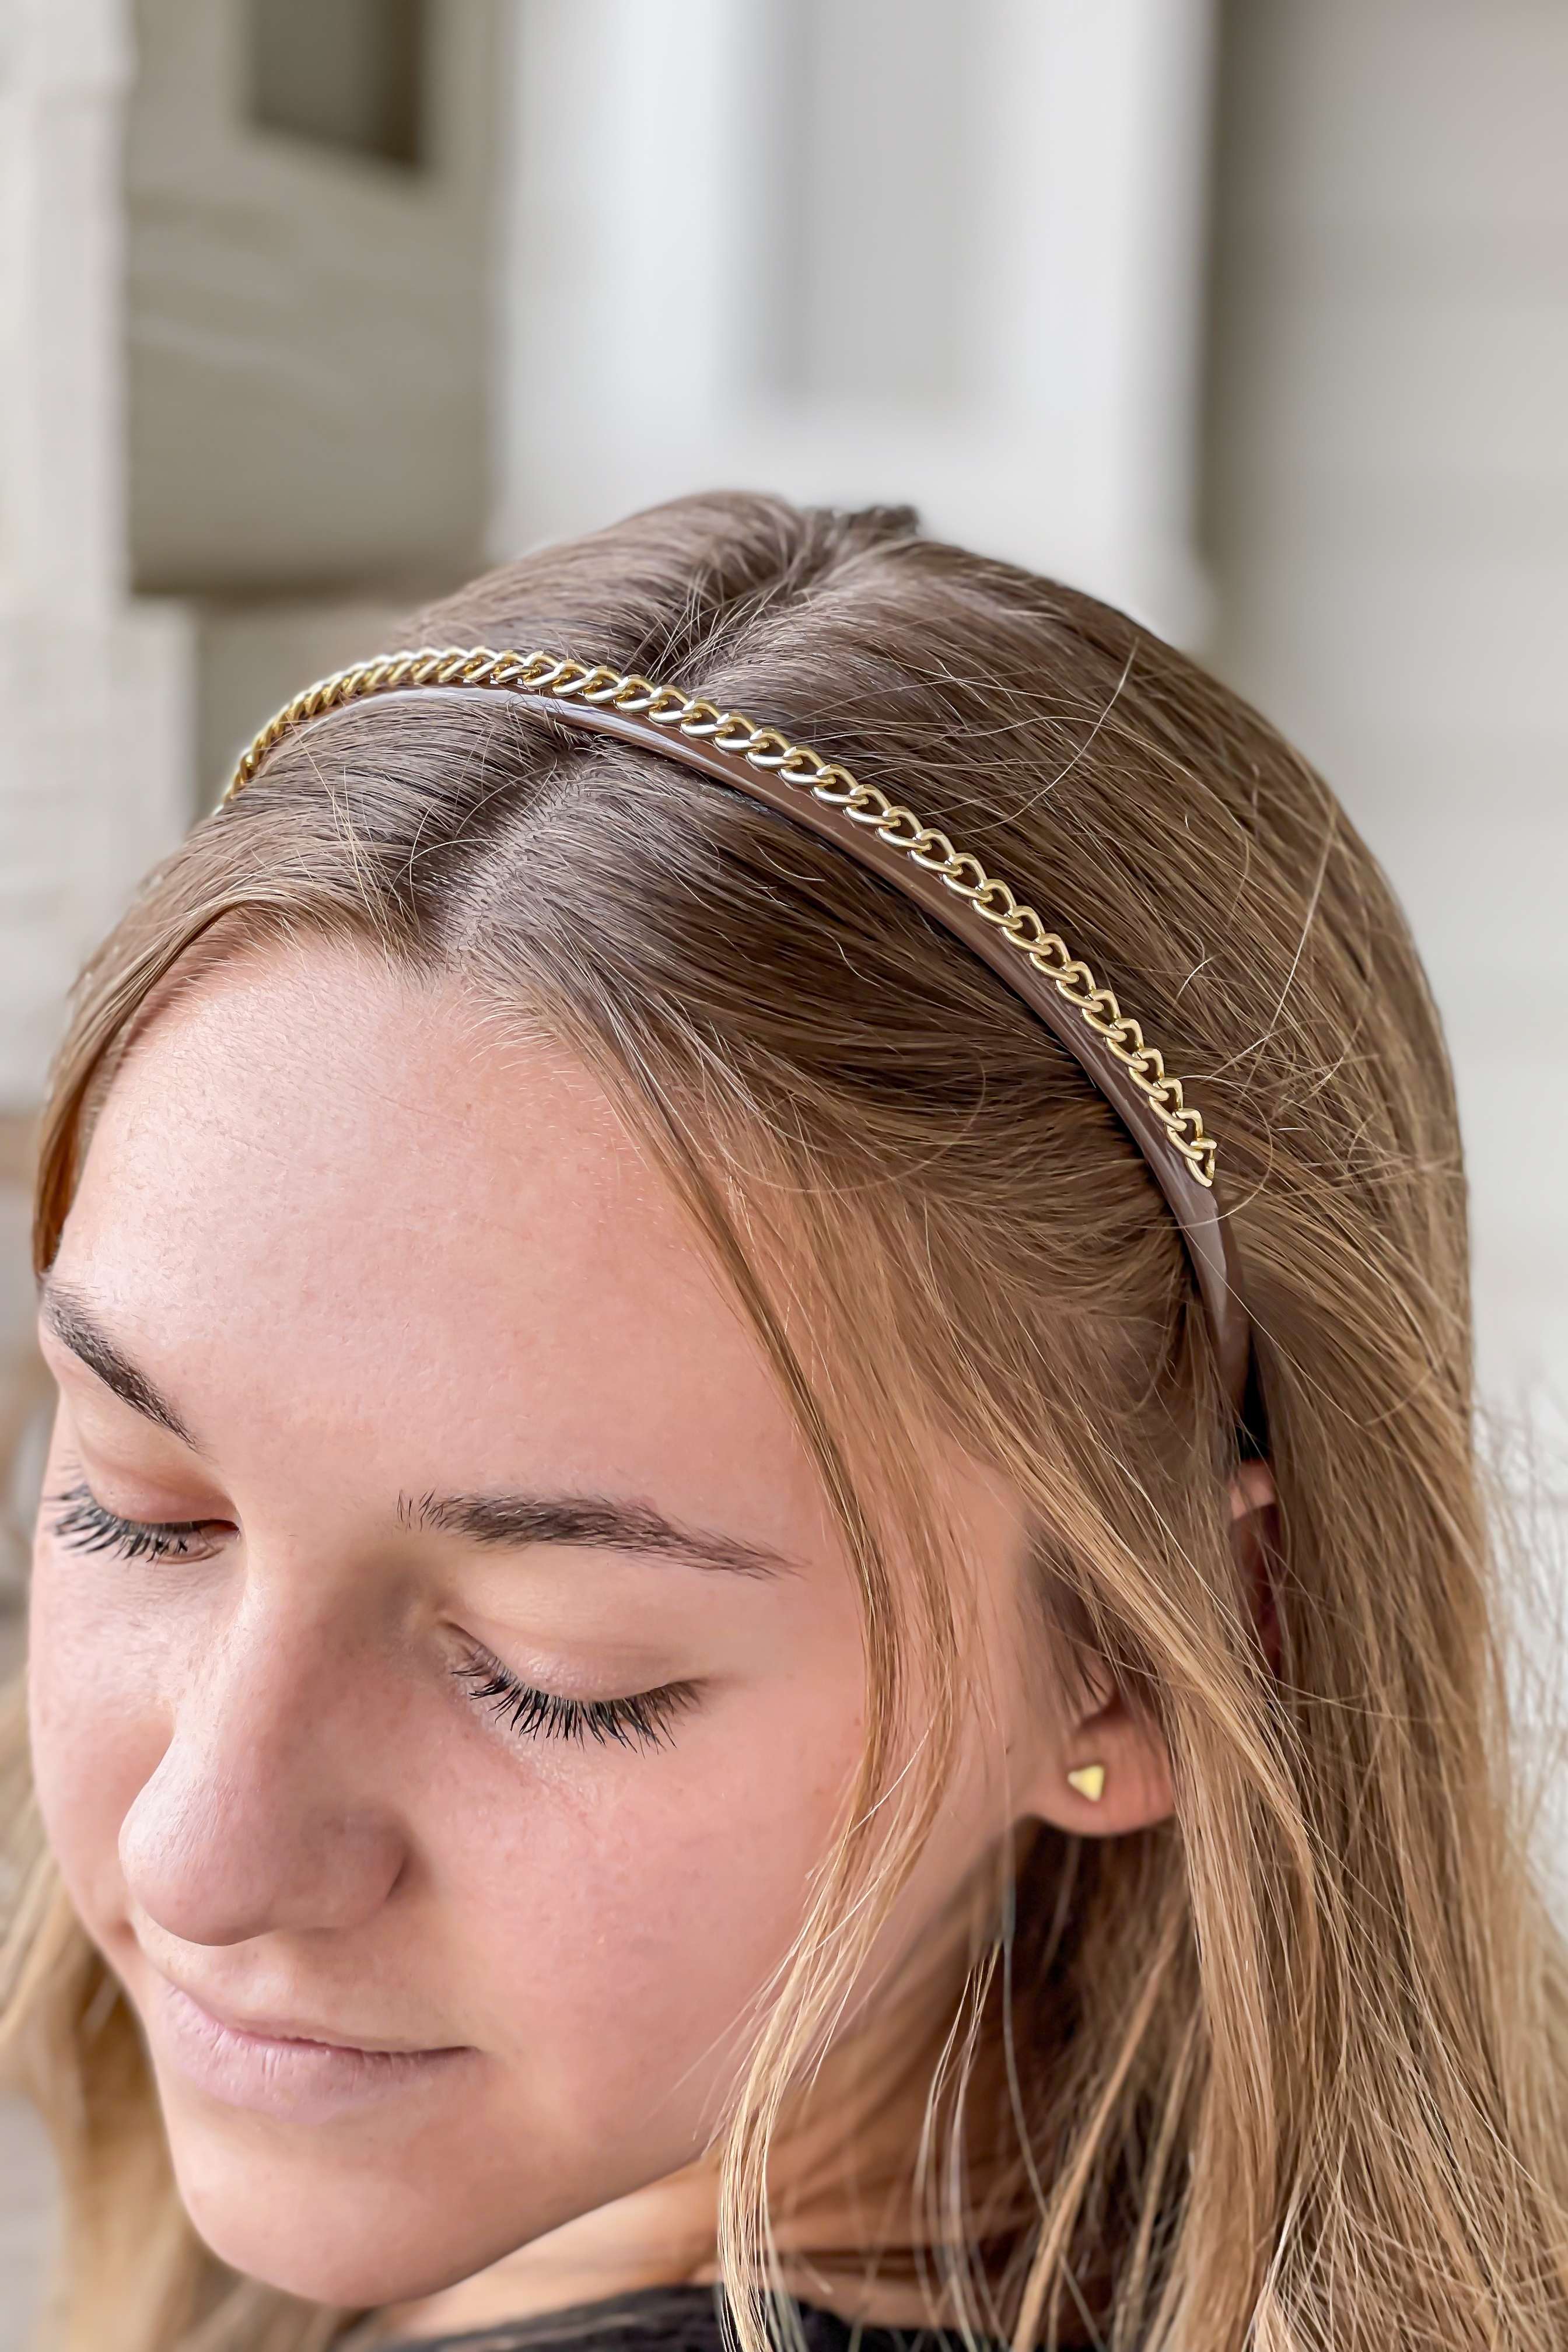 Skinny Headband with Metal Chain Link | 8 Colors - All Sales Final